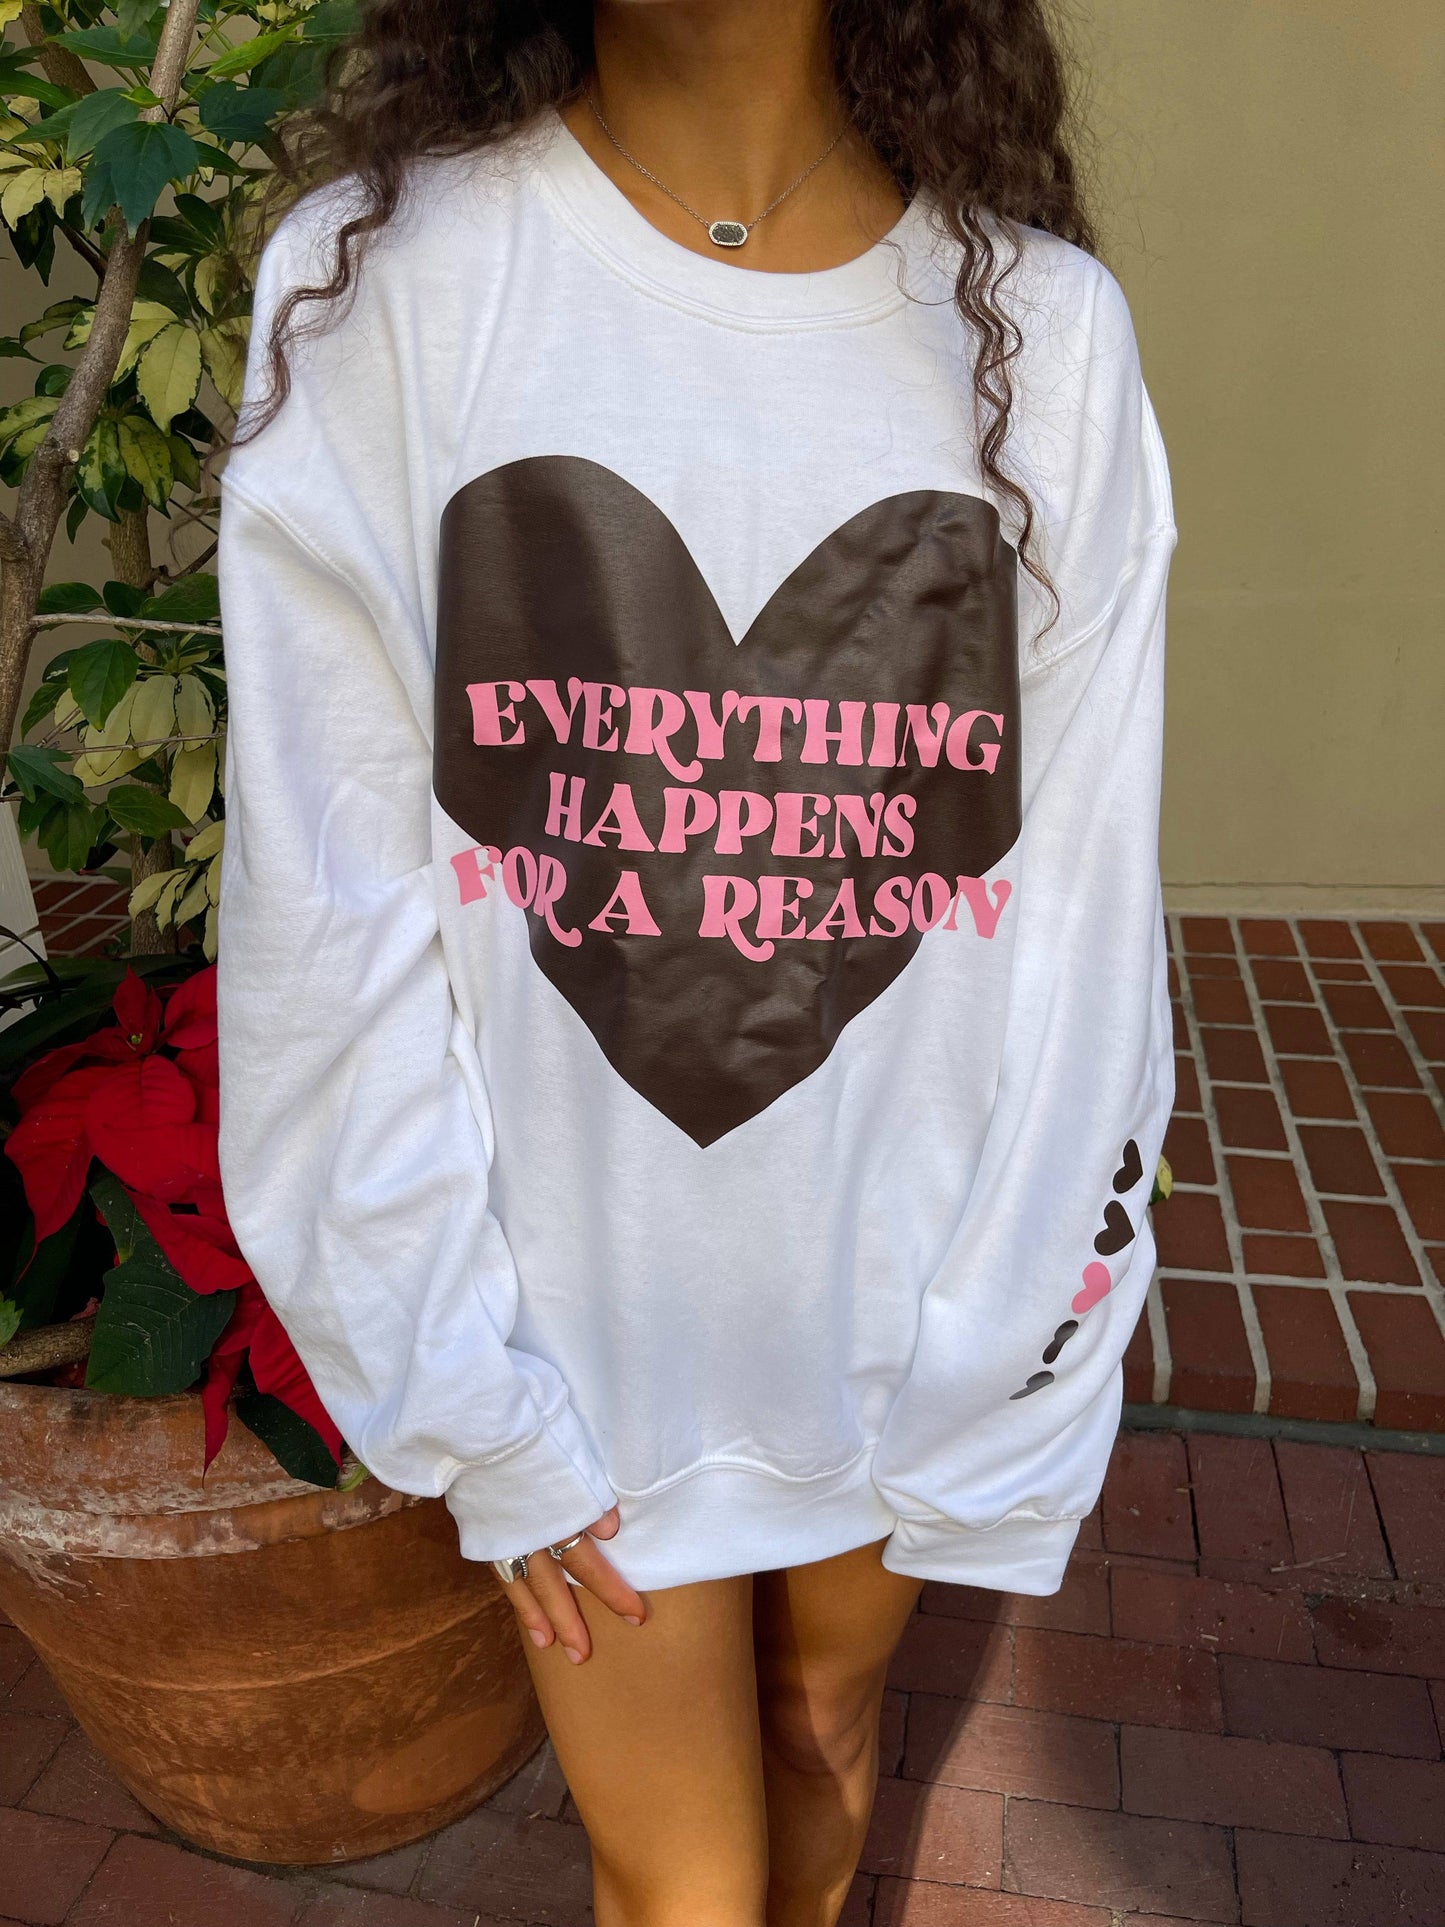 EVERYTHING HAPPENS FOR A REASON CREWNECK - JEWELS KENNEDY DESIGNS